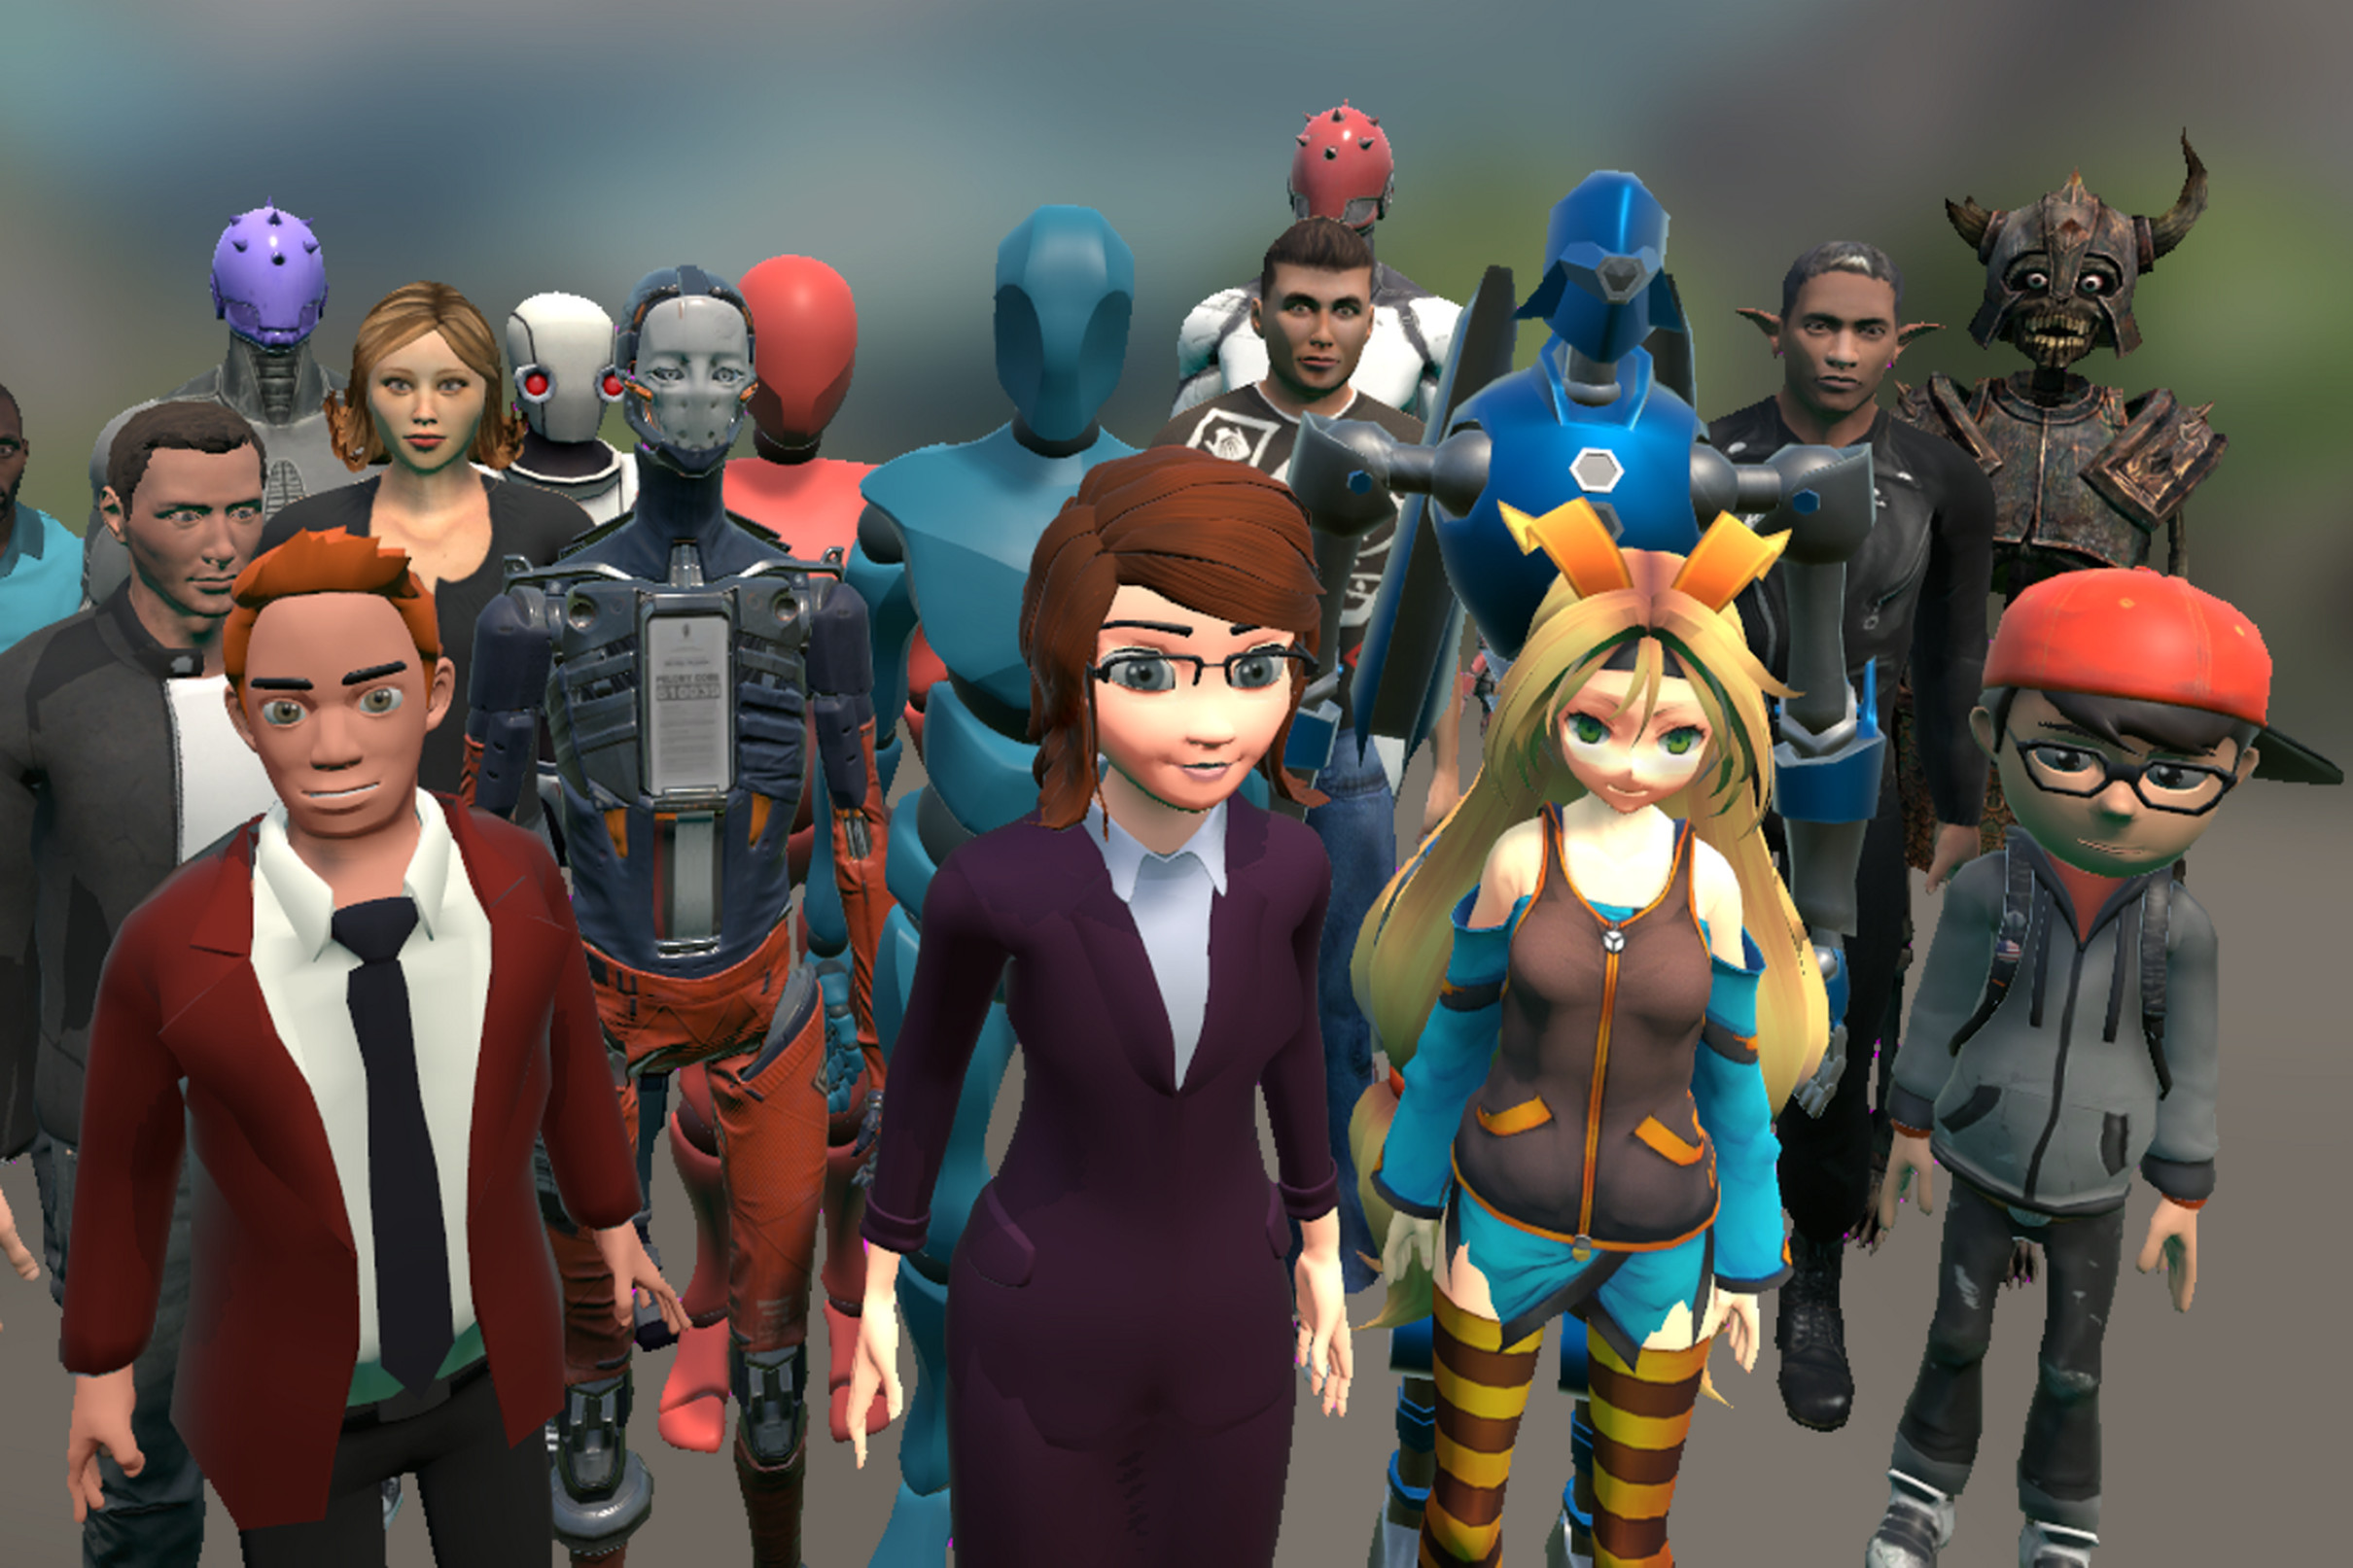 Making Sense of VRChat, the “Metaverse” that People Actually Like